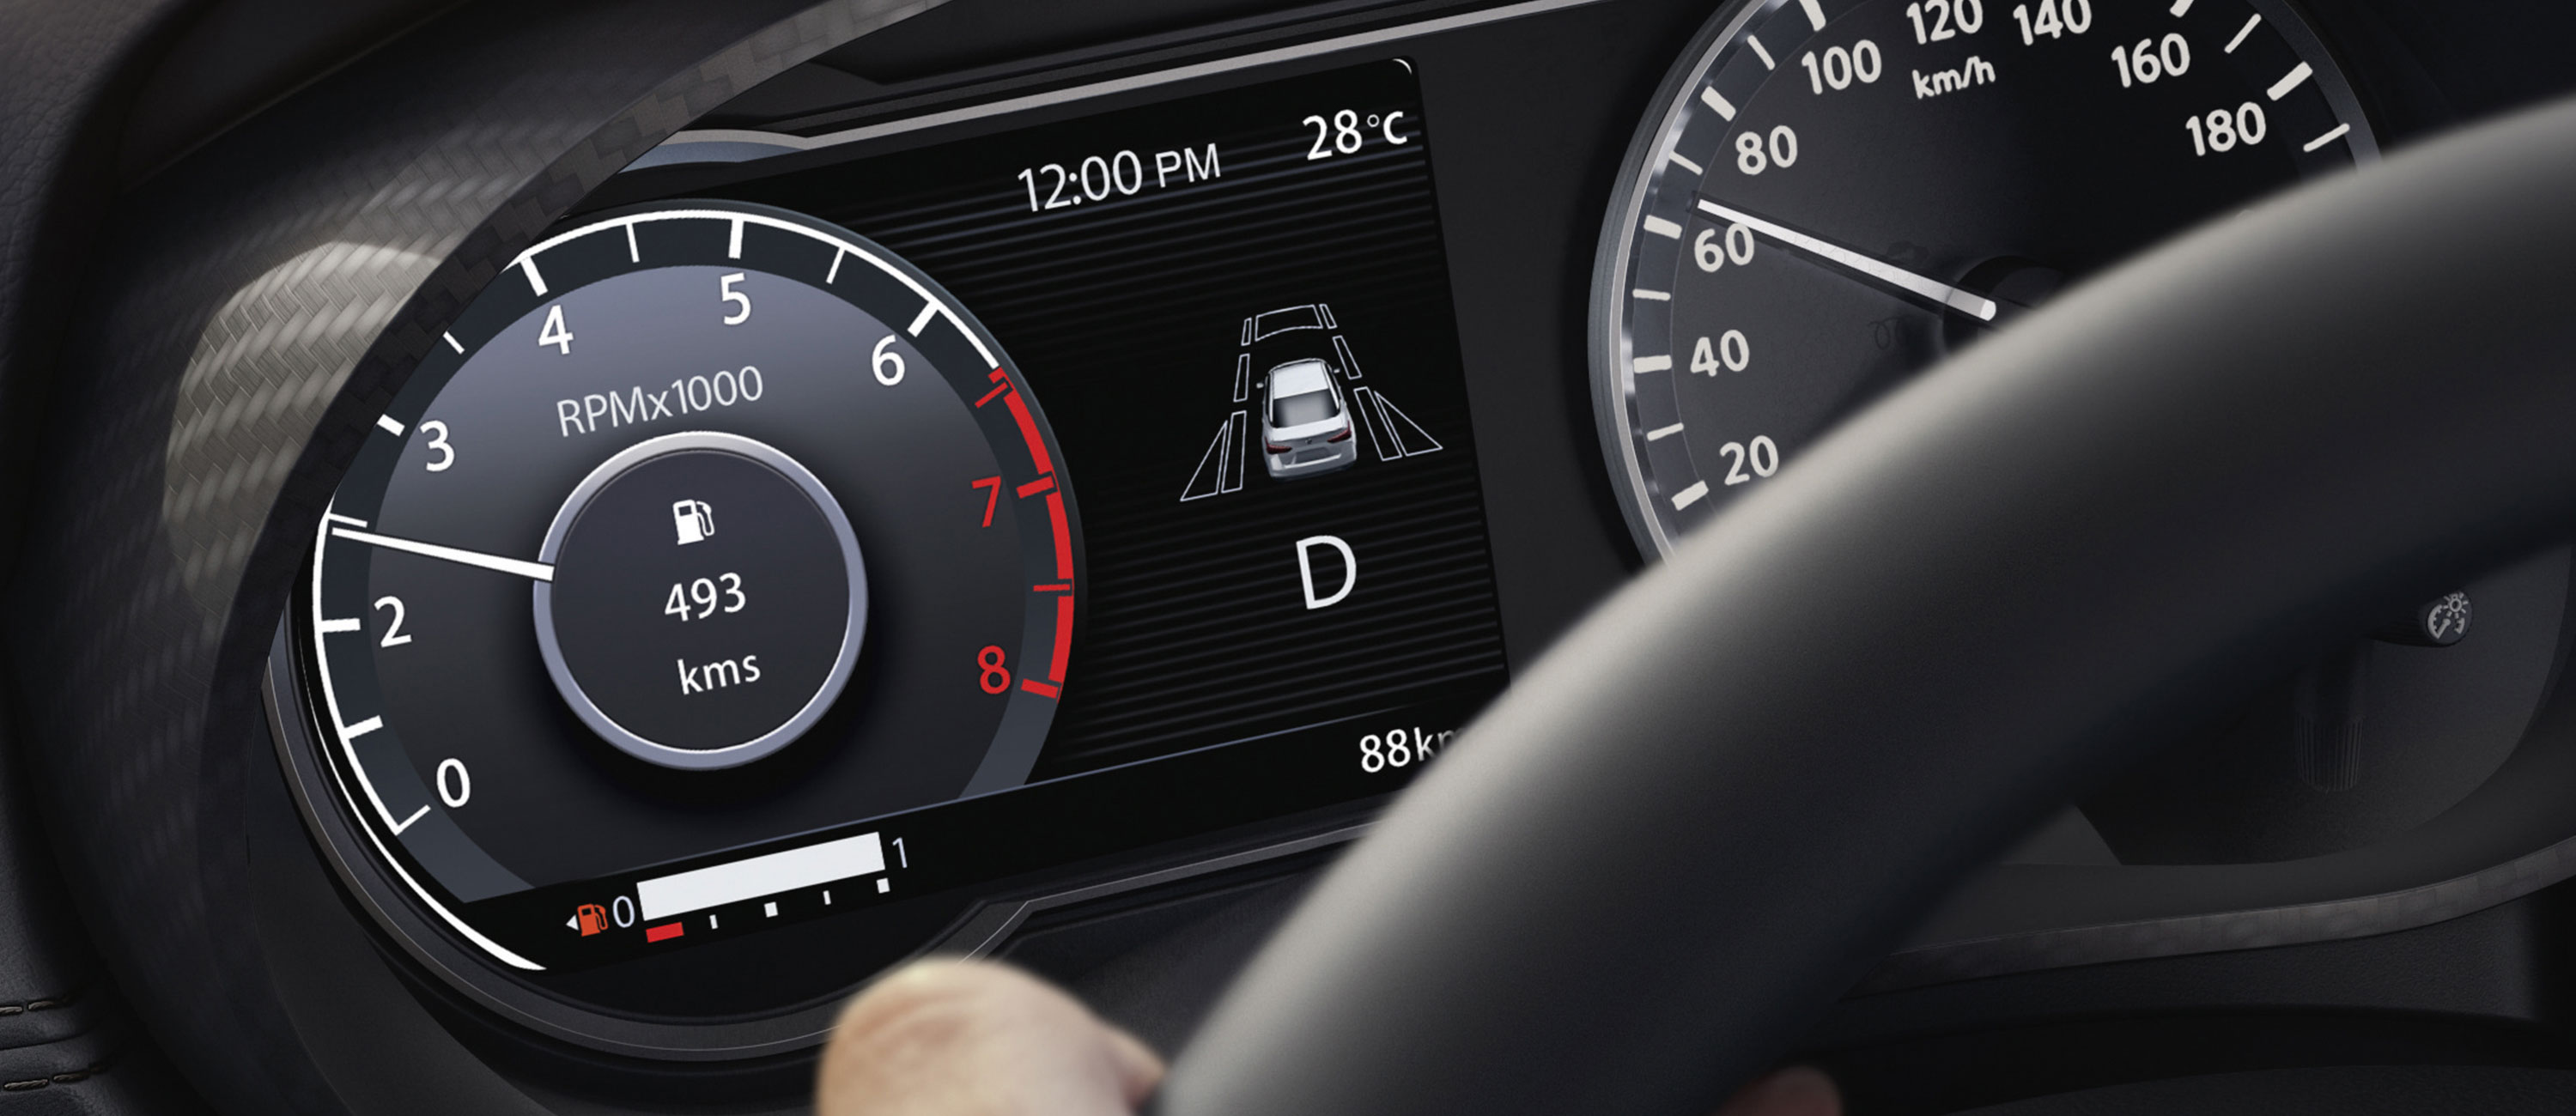 2020 Nissan SUNNY Advanced Drive Assist Display showing tachometer